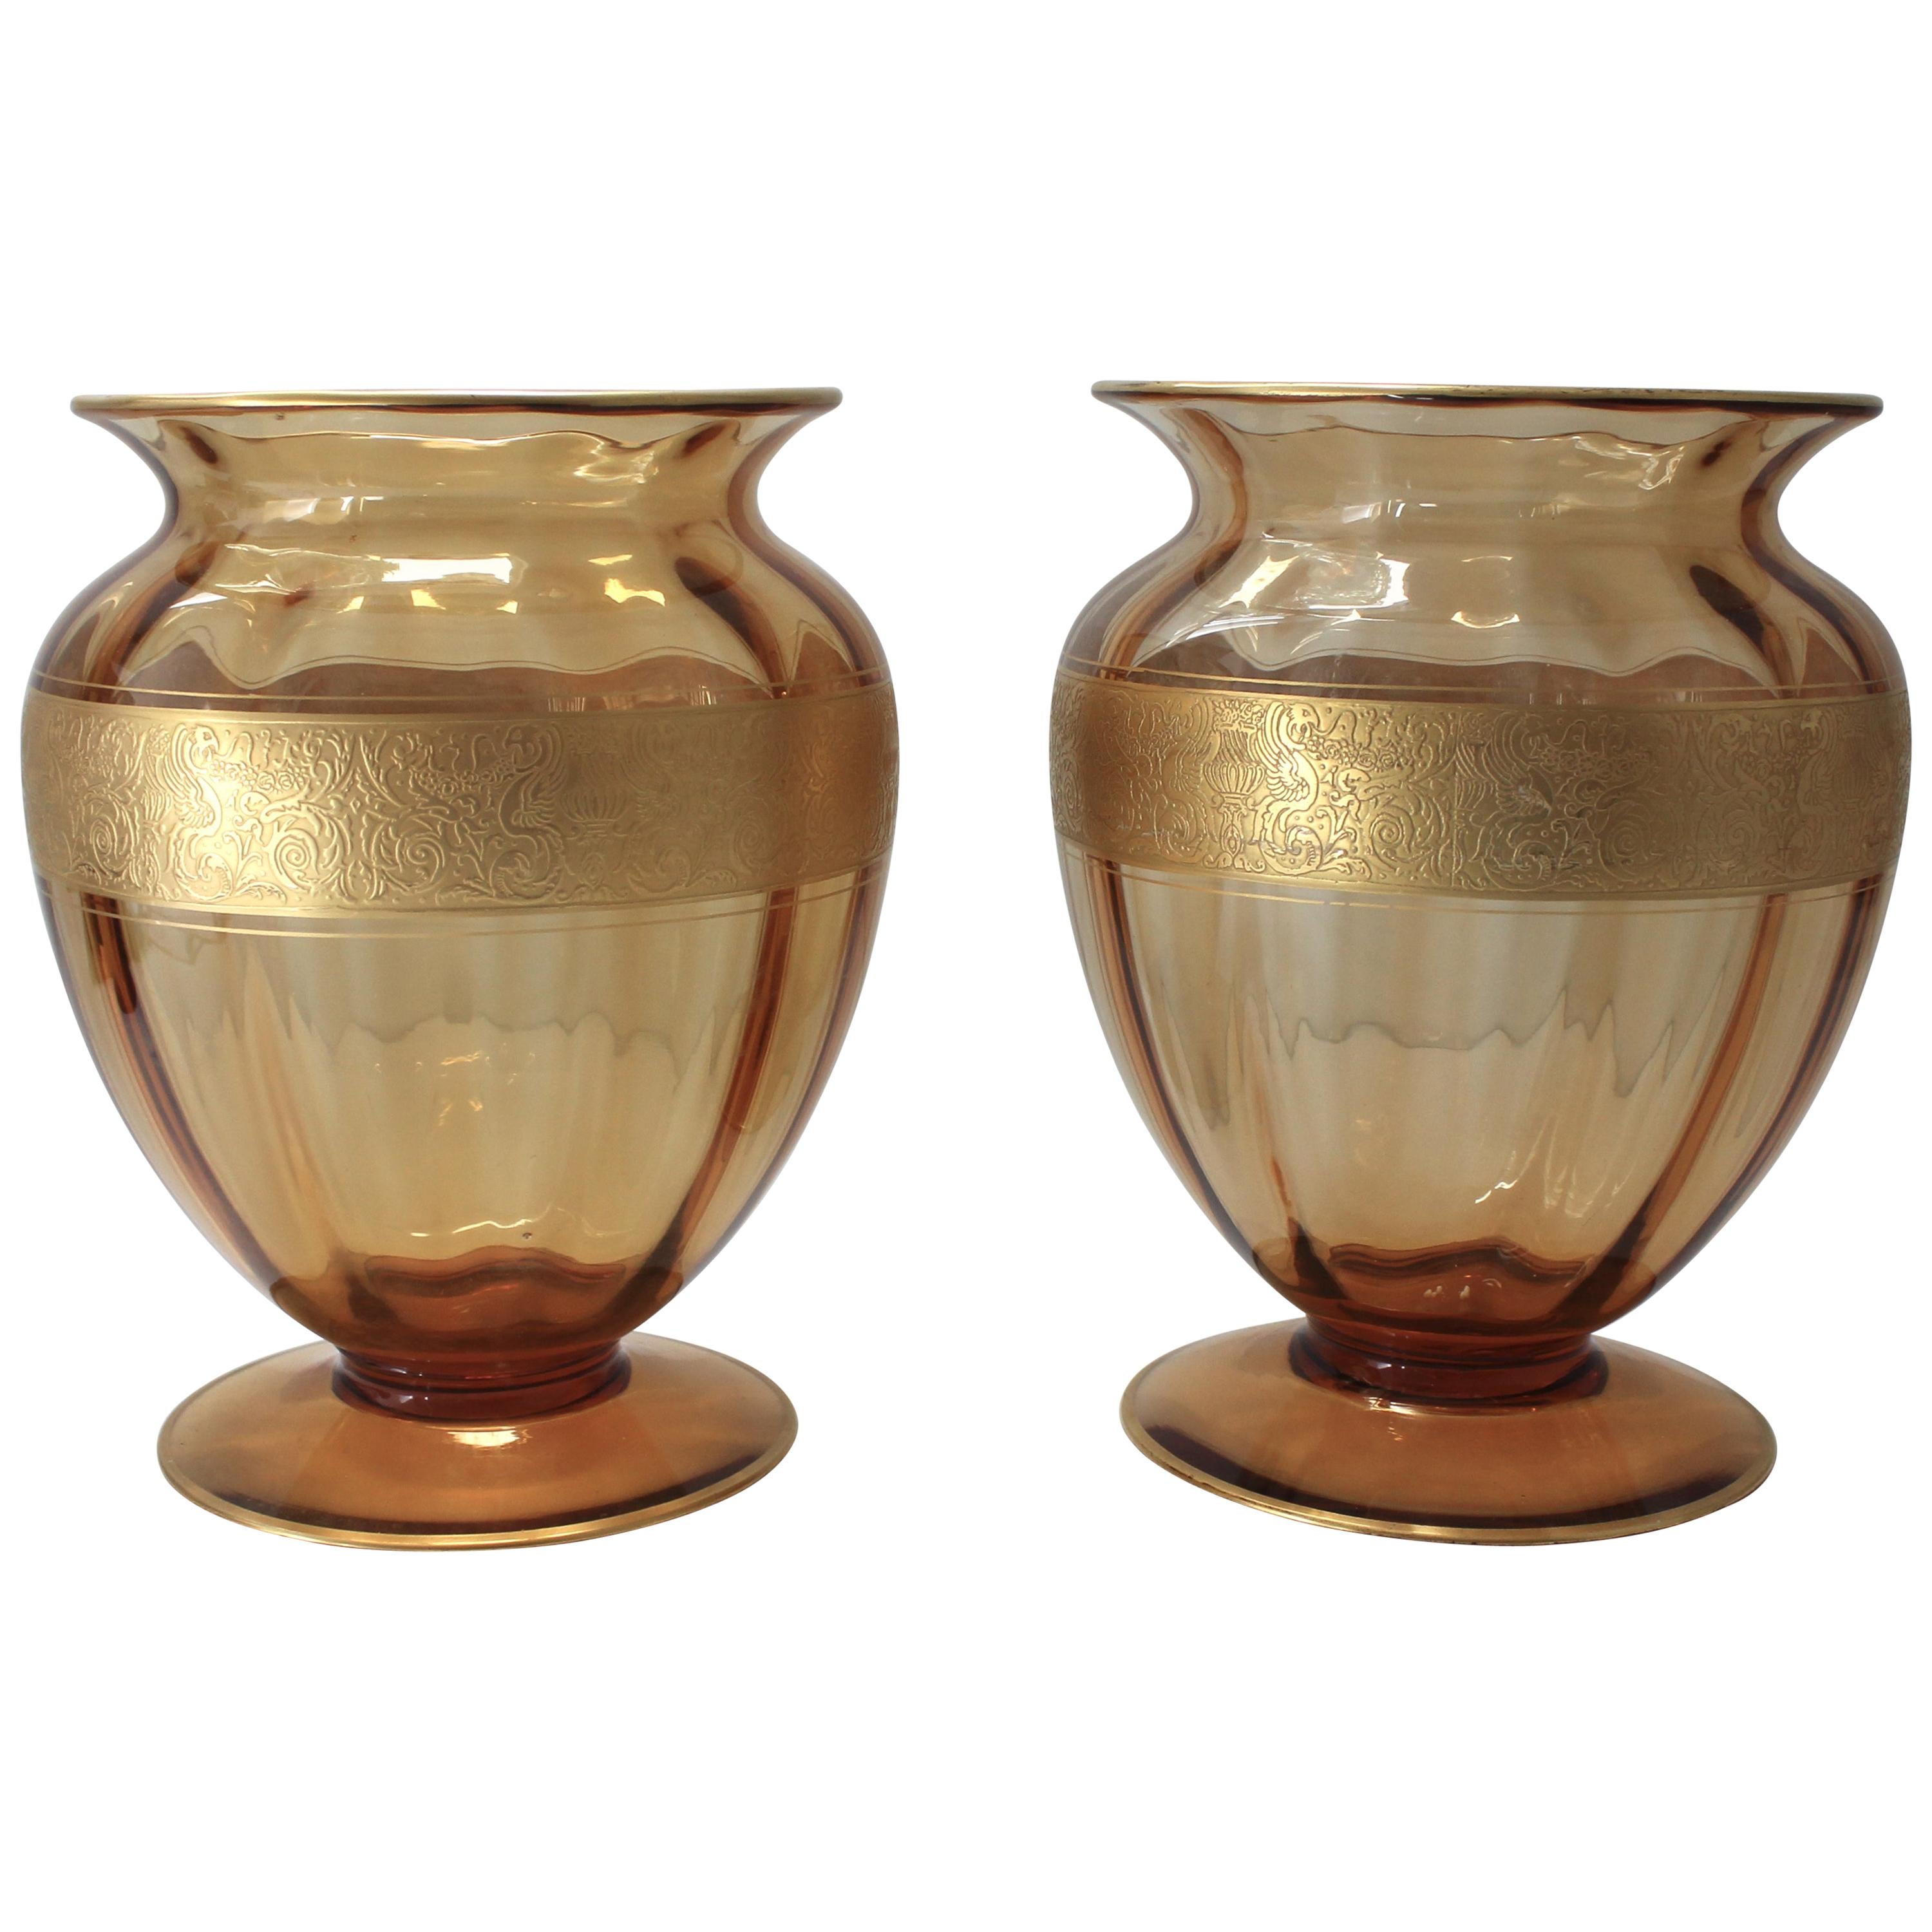 Set of Two Amber Colored Vases by Moser Glassworks